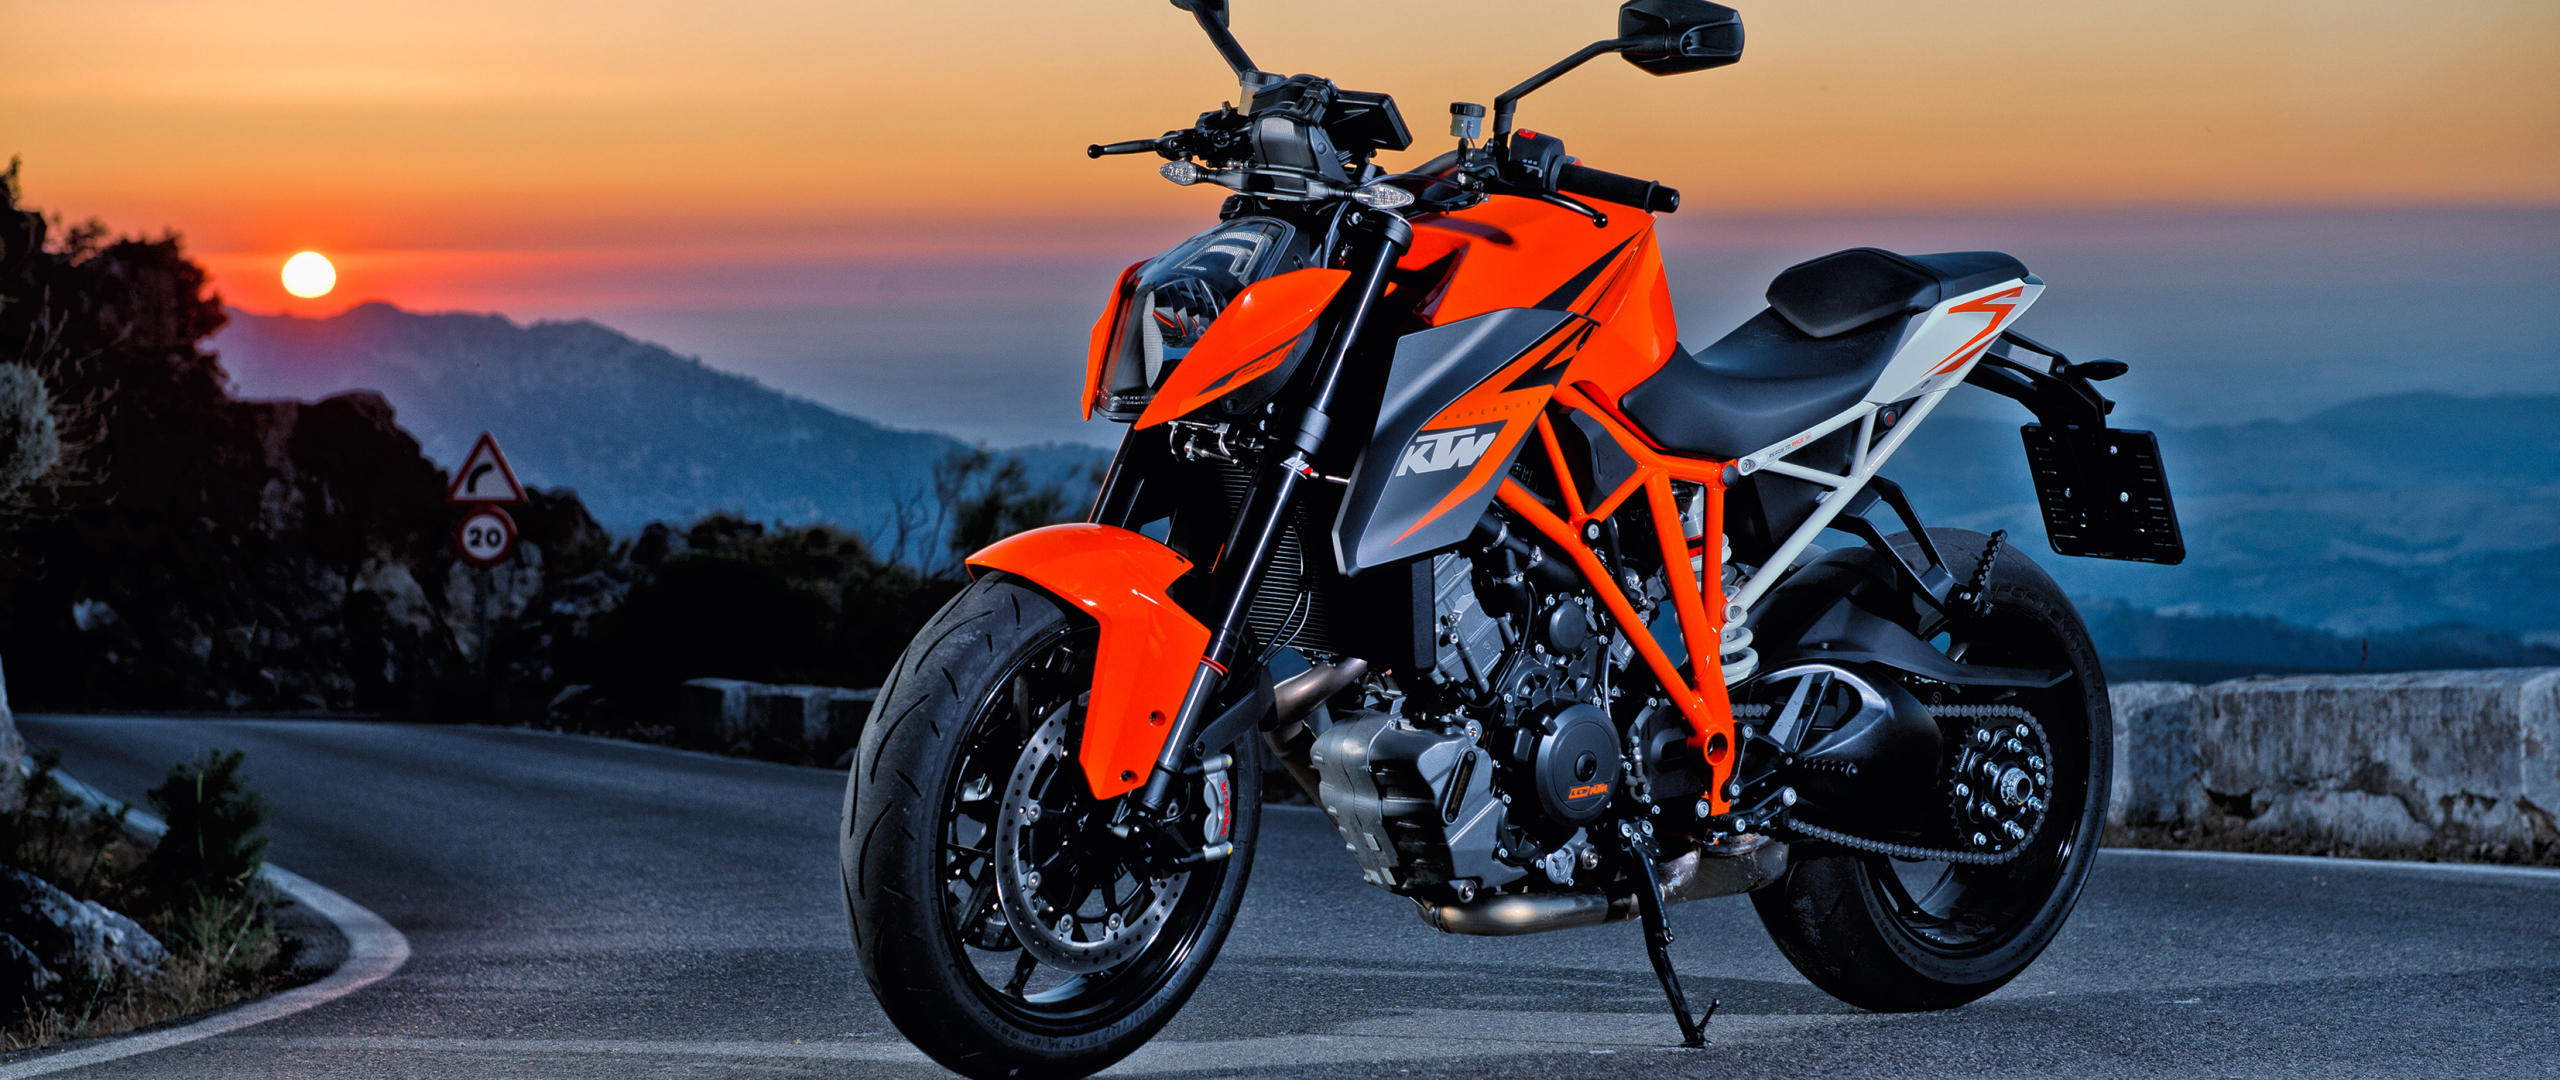 KTM 1290 Super Duke Wallpaper for Android, iPhone and iPad